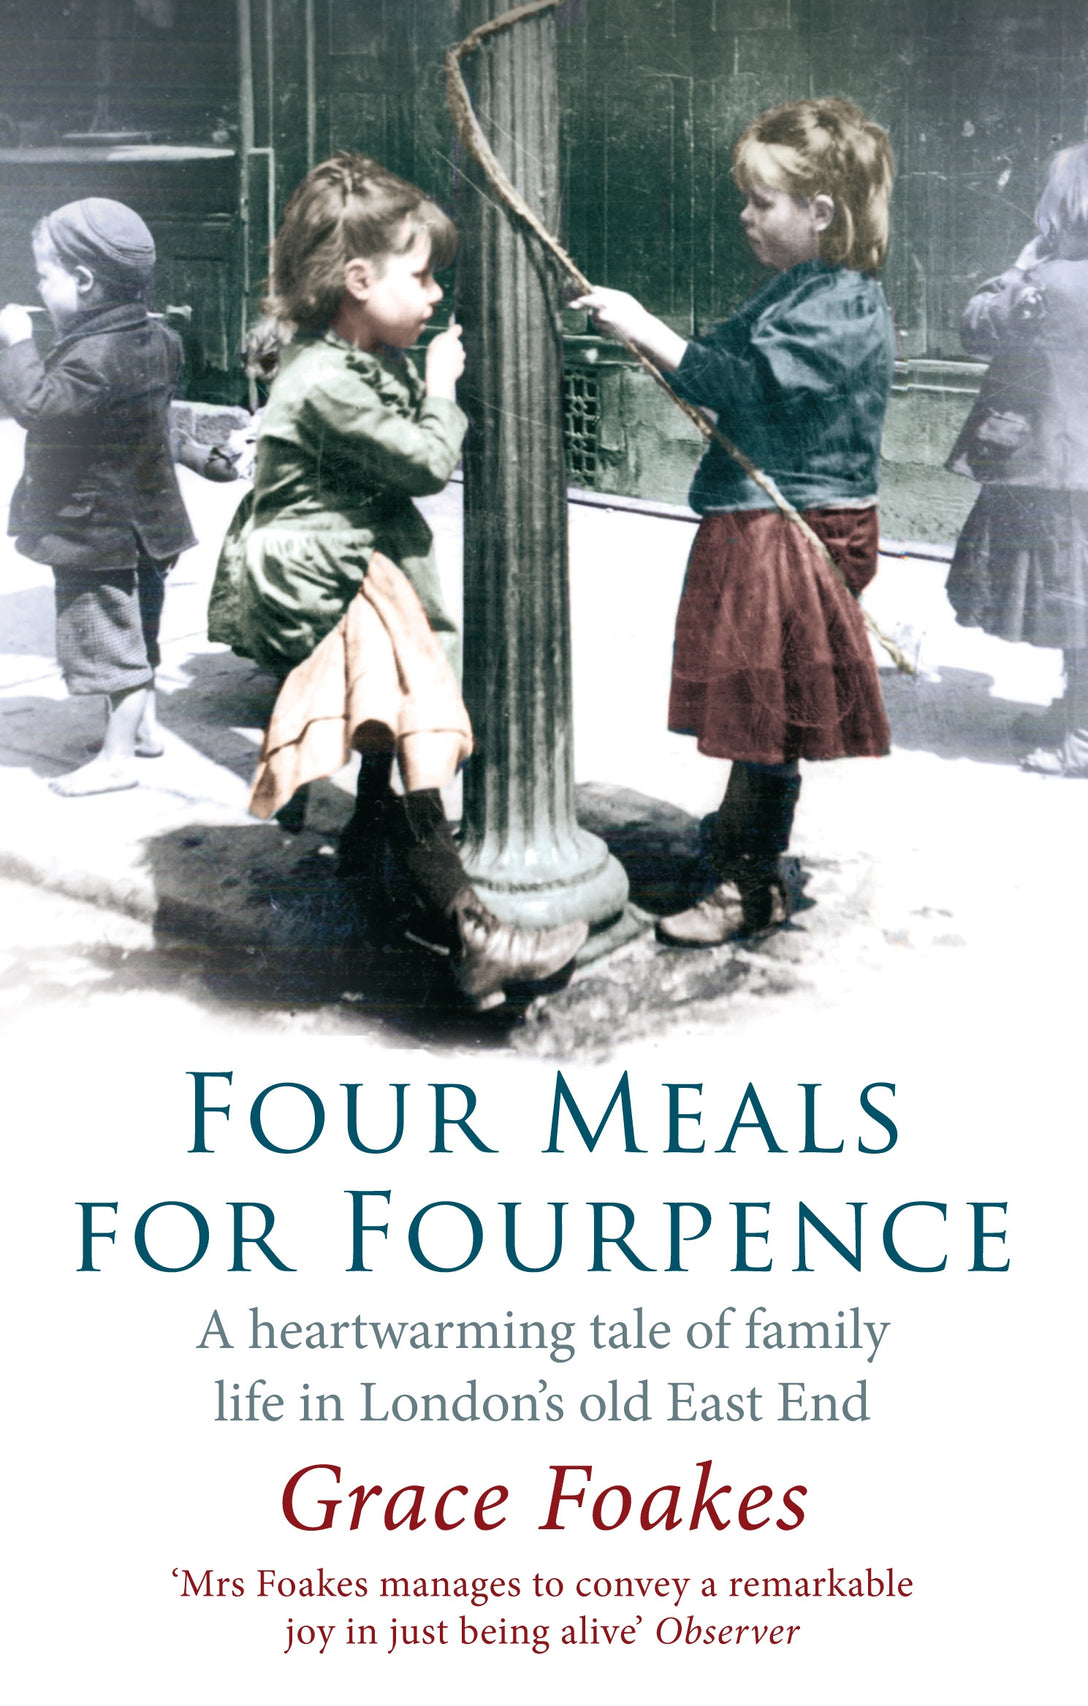 Four Meals For Fourpence by Grace Foakes